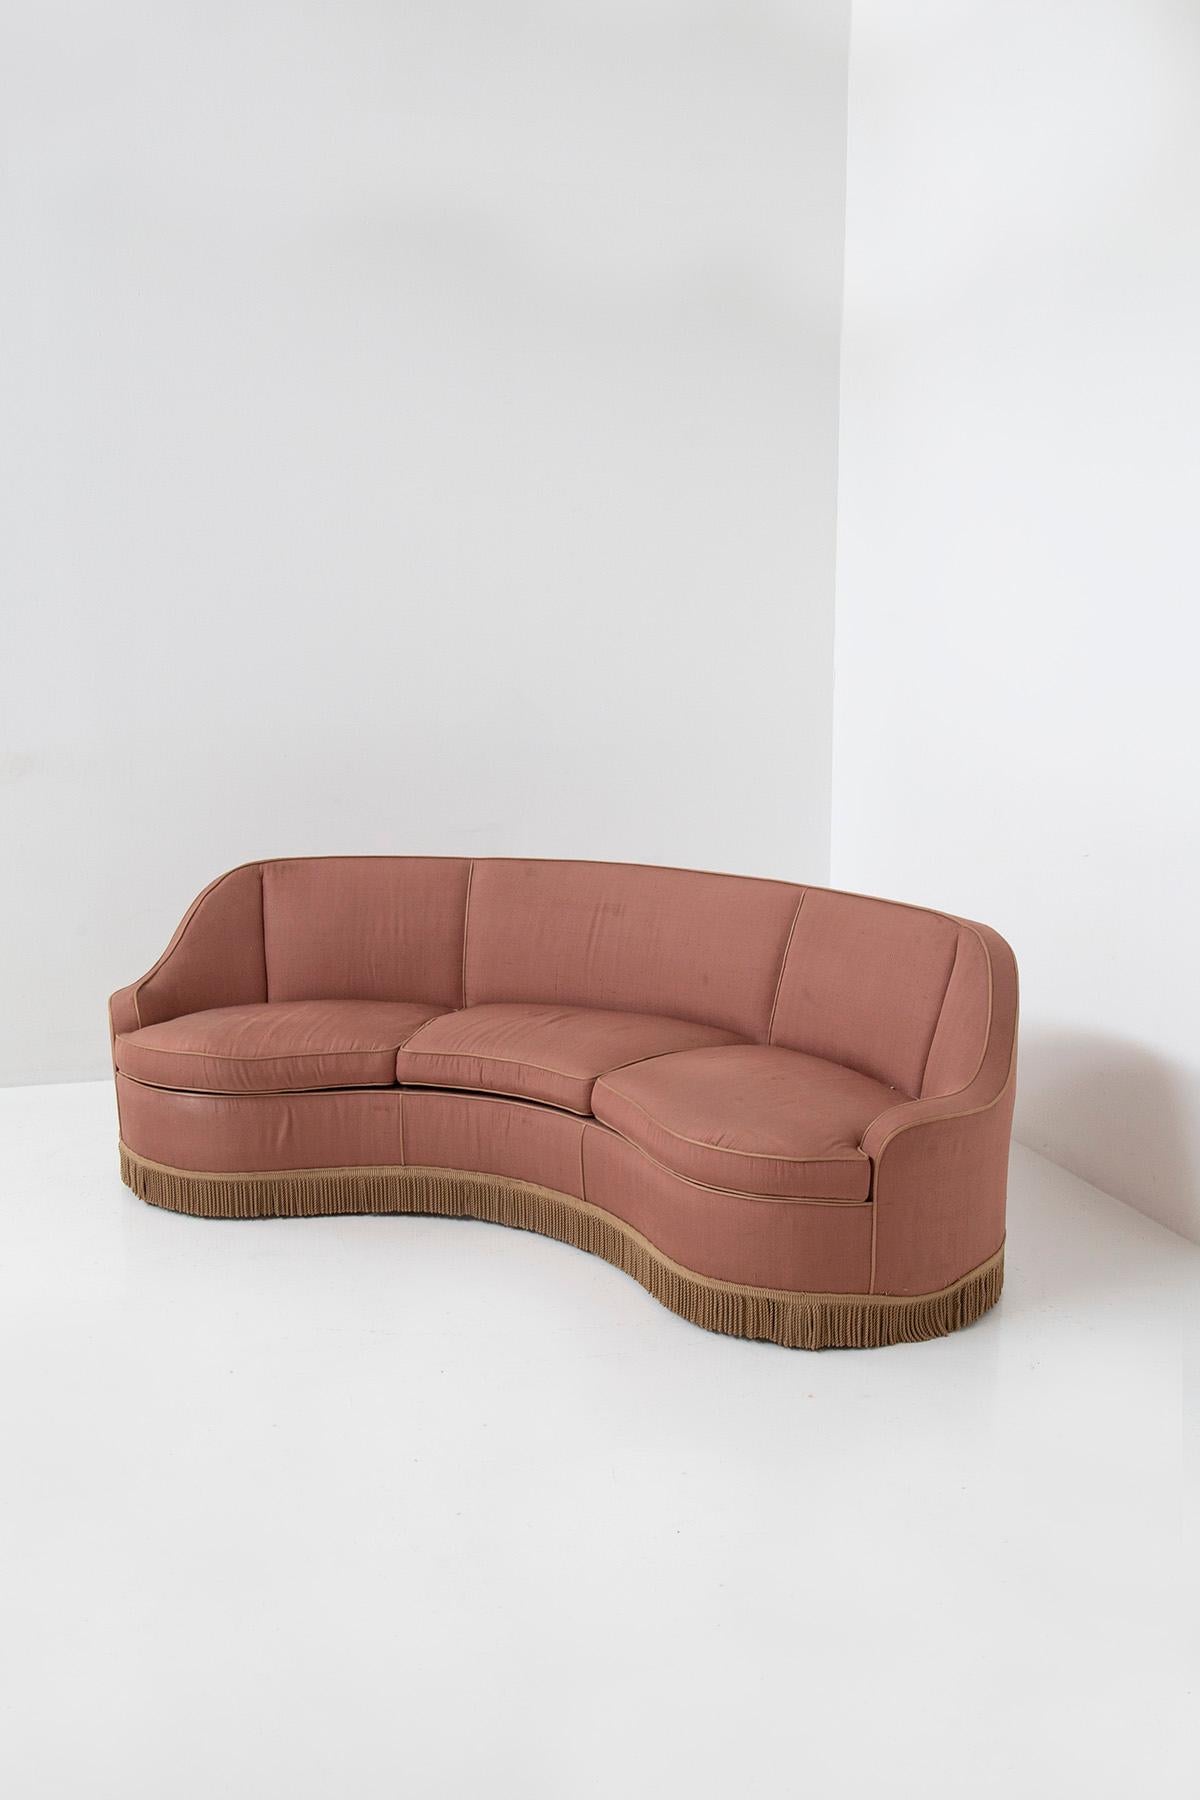 The delightful three-seater sofa attributed to the esteemed 1950s designer Gio Ponti is a remarkable piece of furniture for Casa e Giardino . By purchasing this sofa, you not only take home an elegant and original Italian sofa, but also a